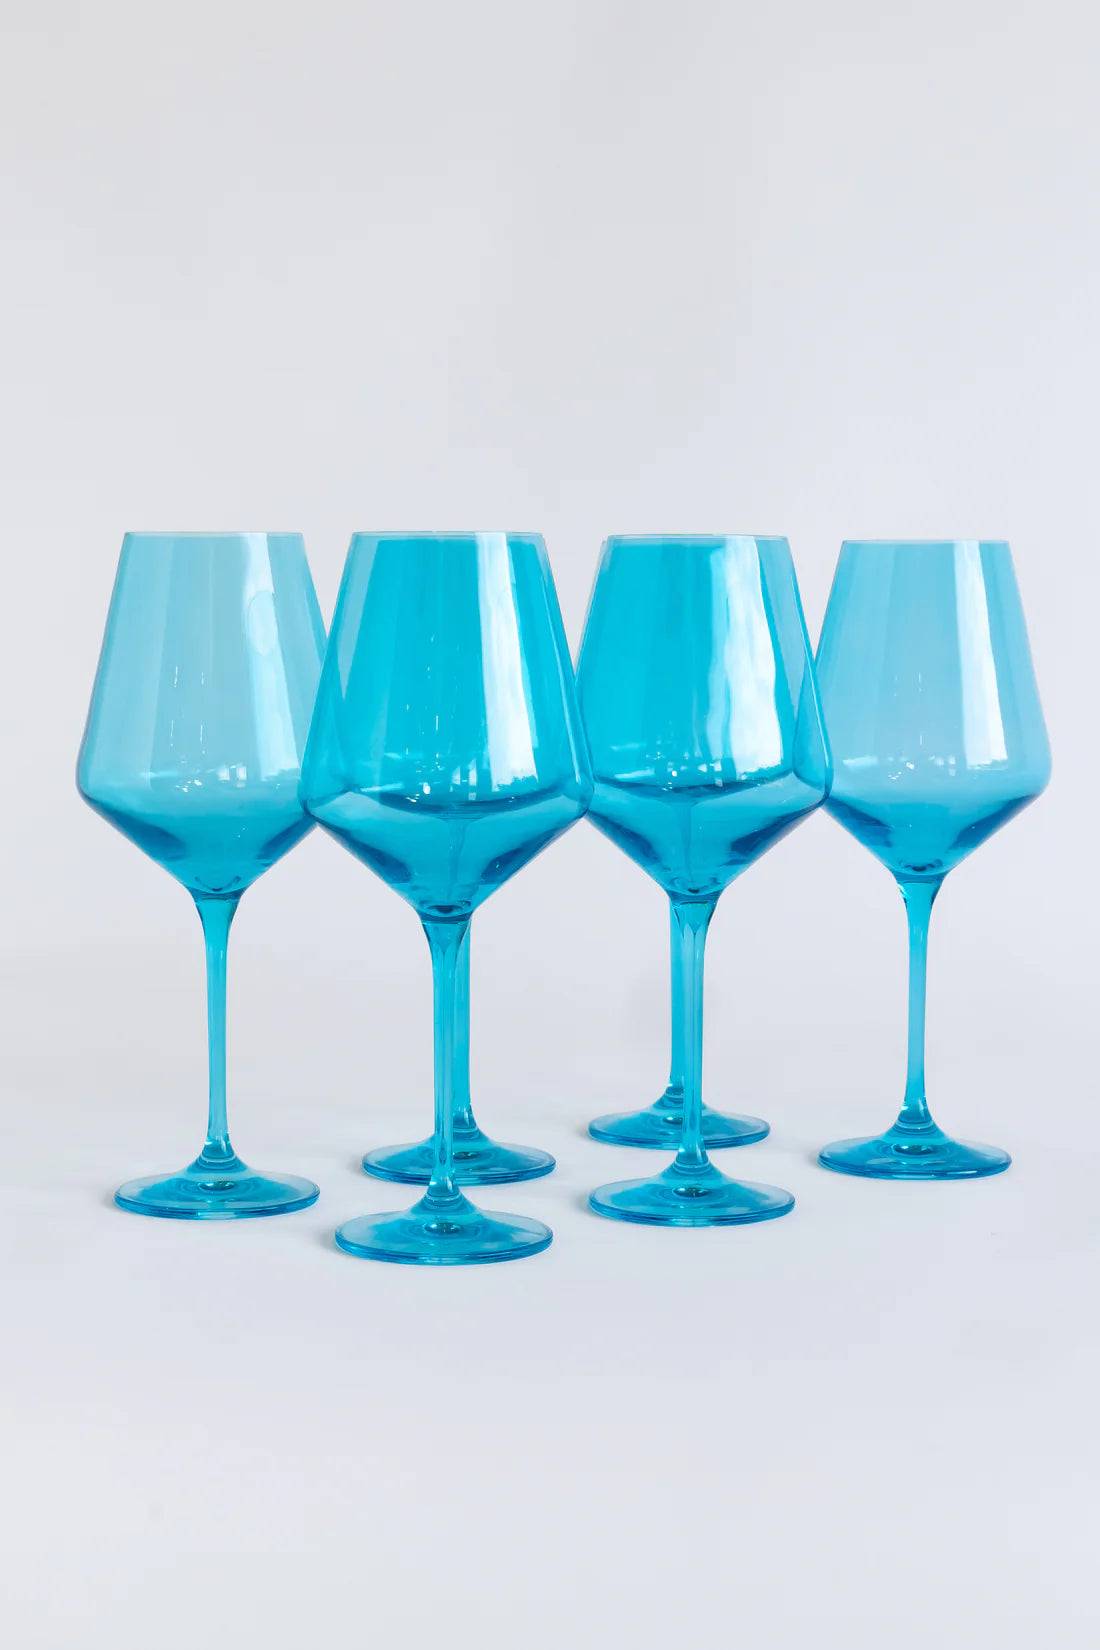 Estelle Colored Glass Set of 6 Stemless Wineglasses